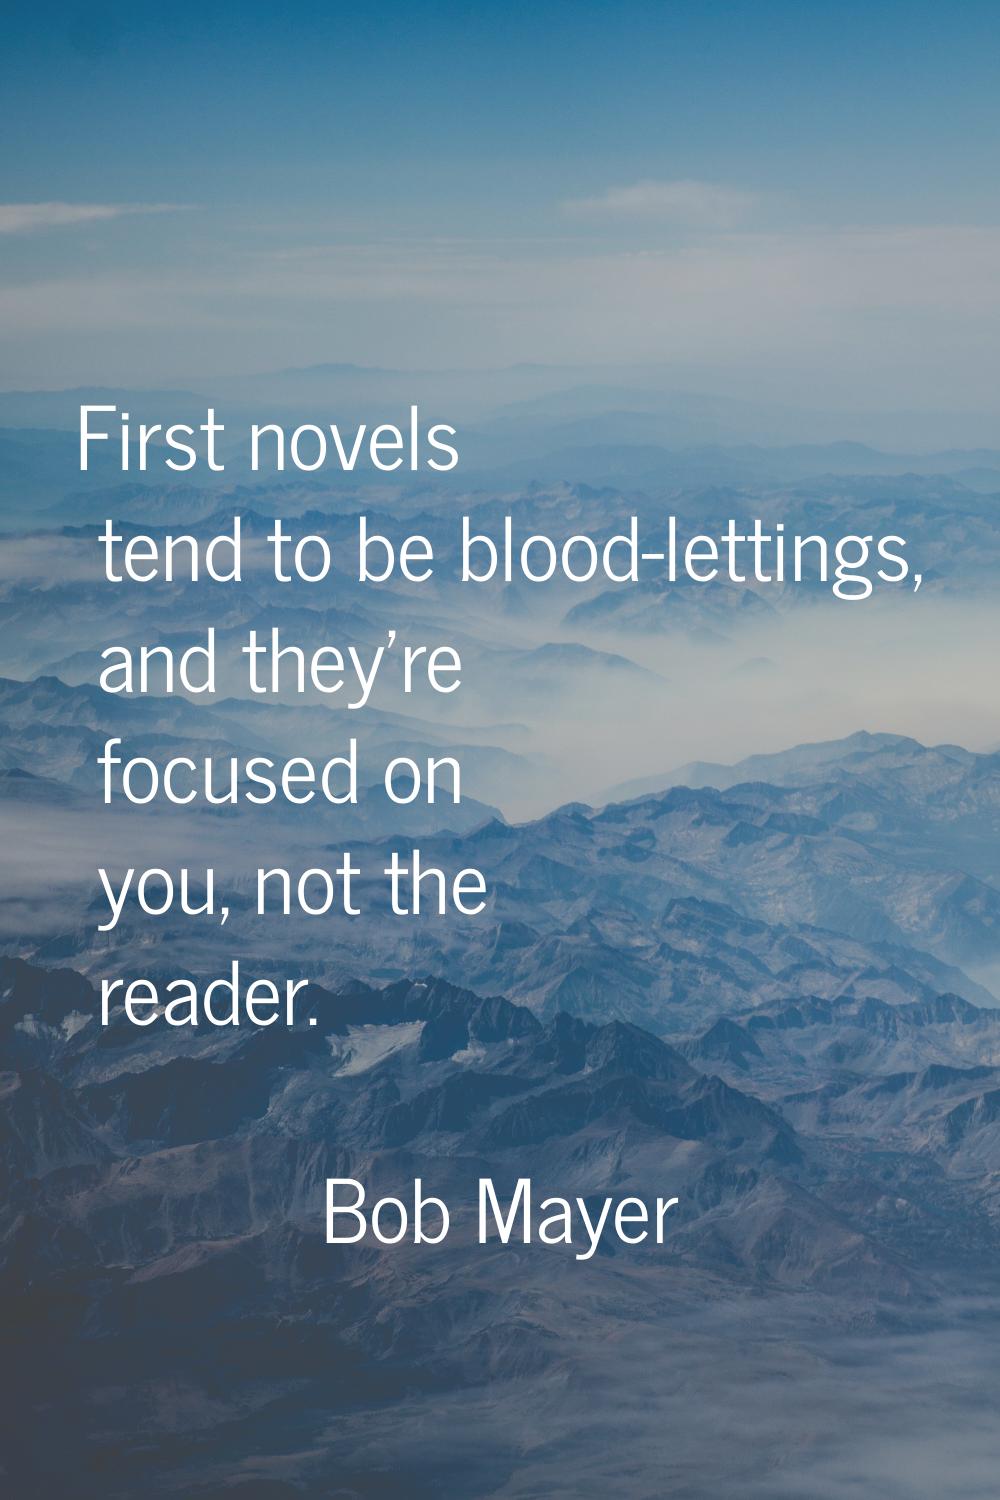 First novels tend to be blood-lettings, and they're focused on you, not the reader.